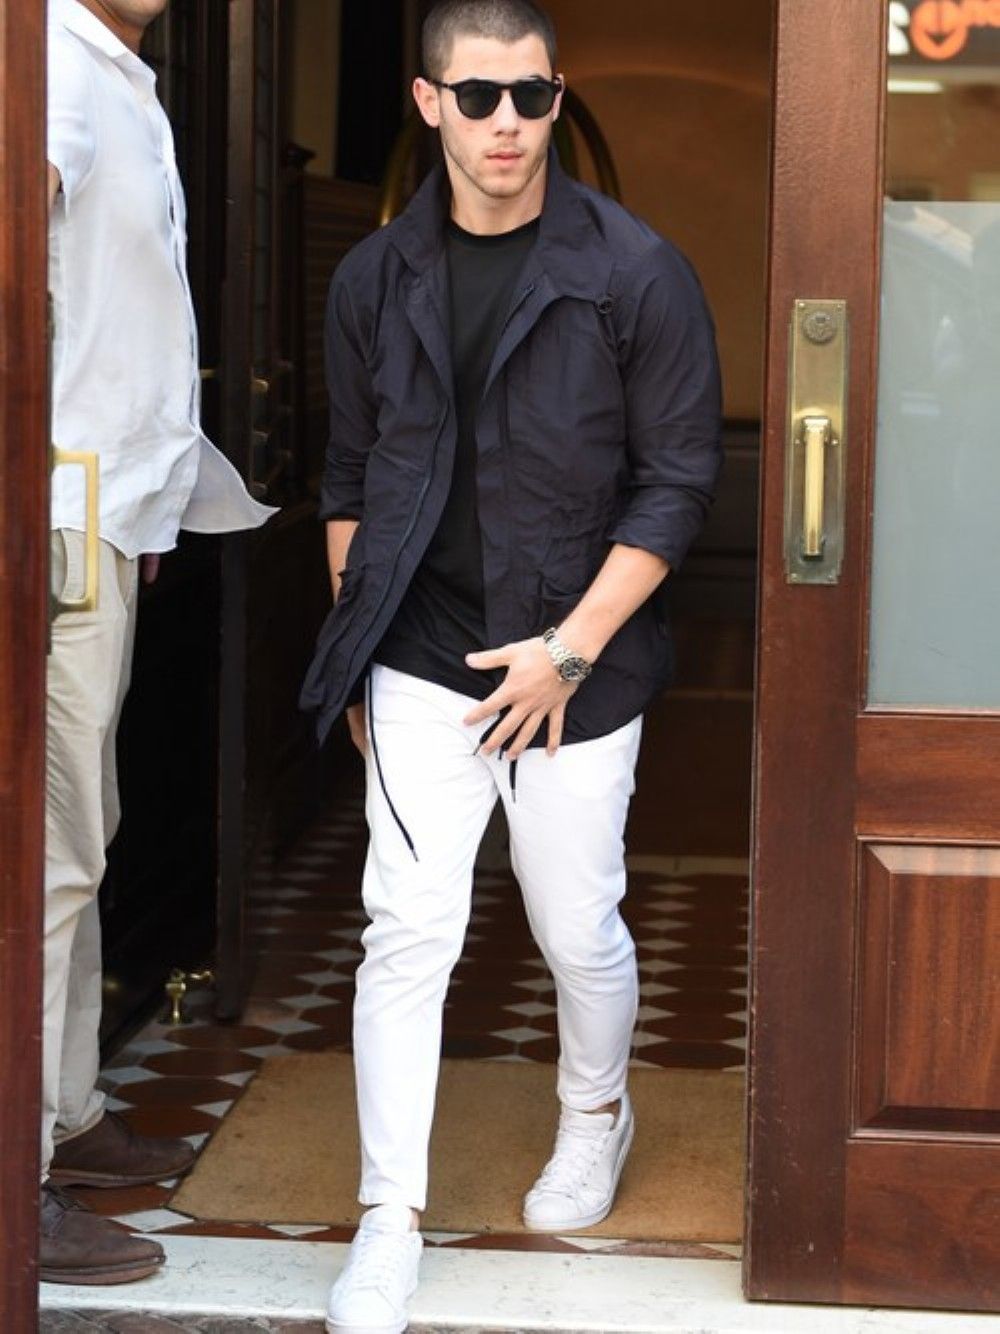 What To Wear With White Jeans - Men's White Jeans Outfits & Style